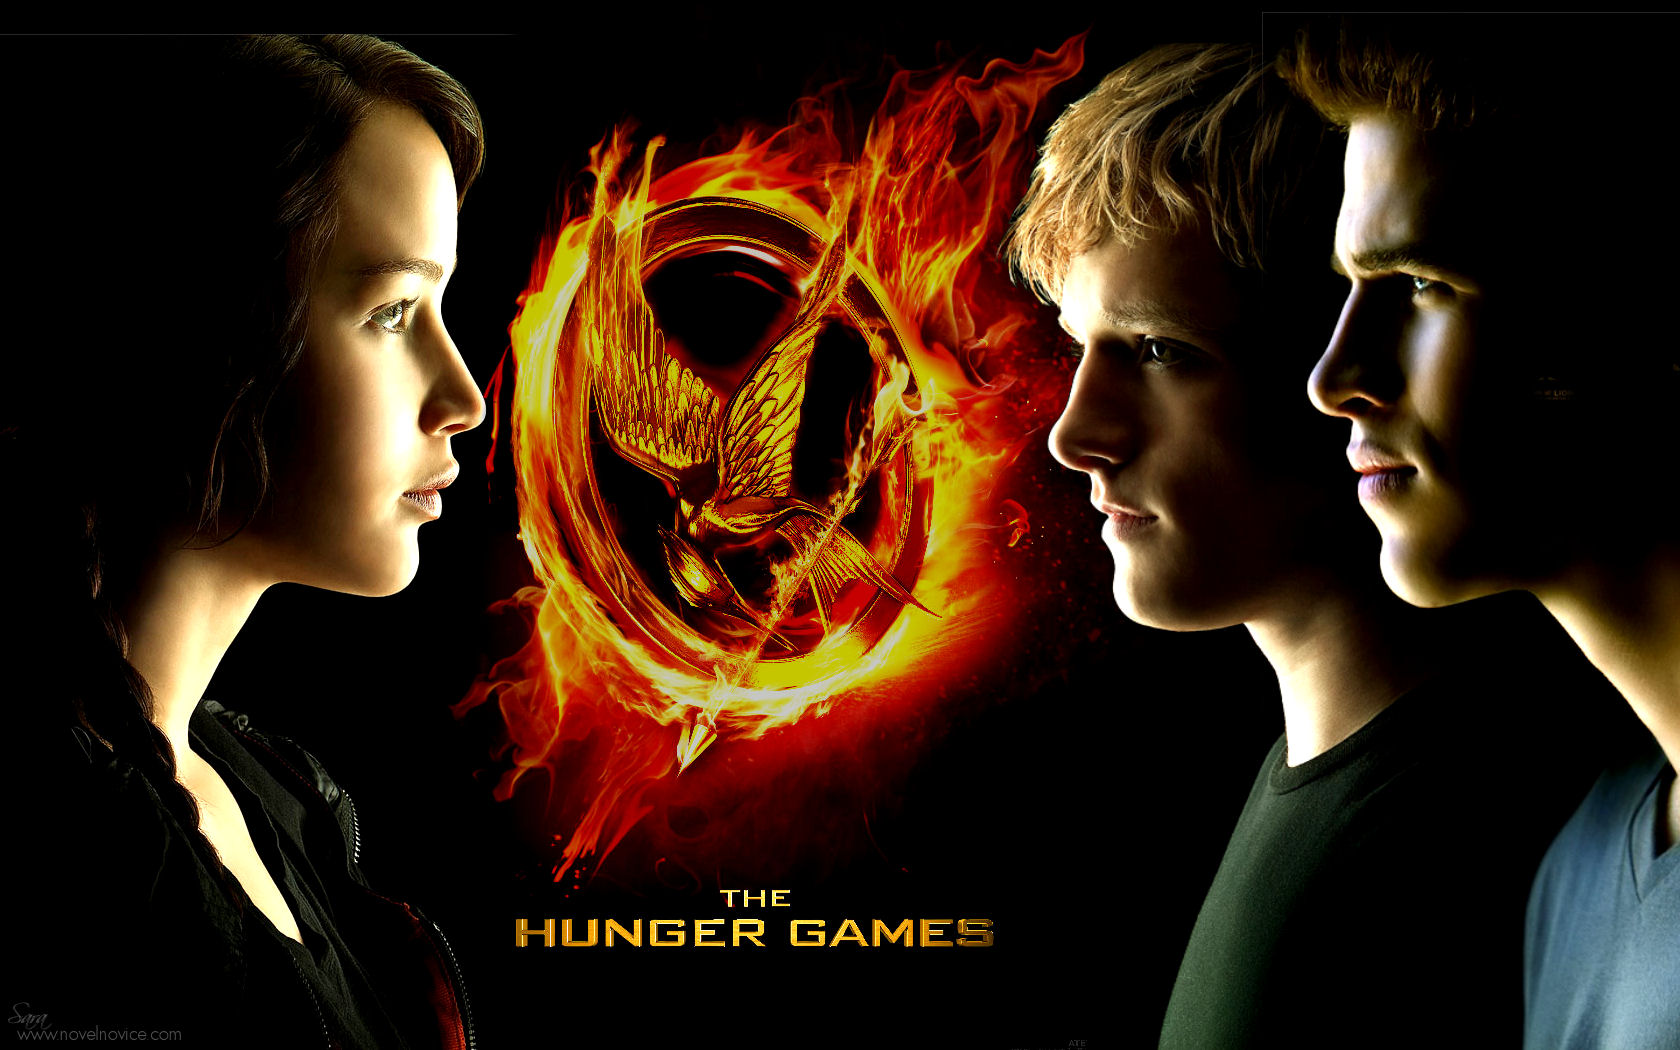 The Hunger Games (film series) - Wikipedia